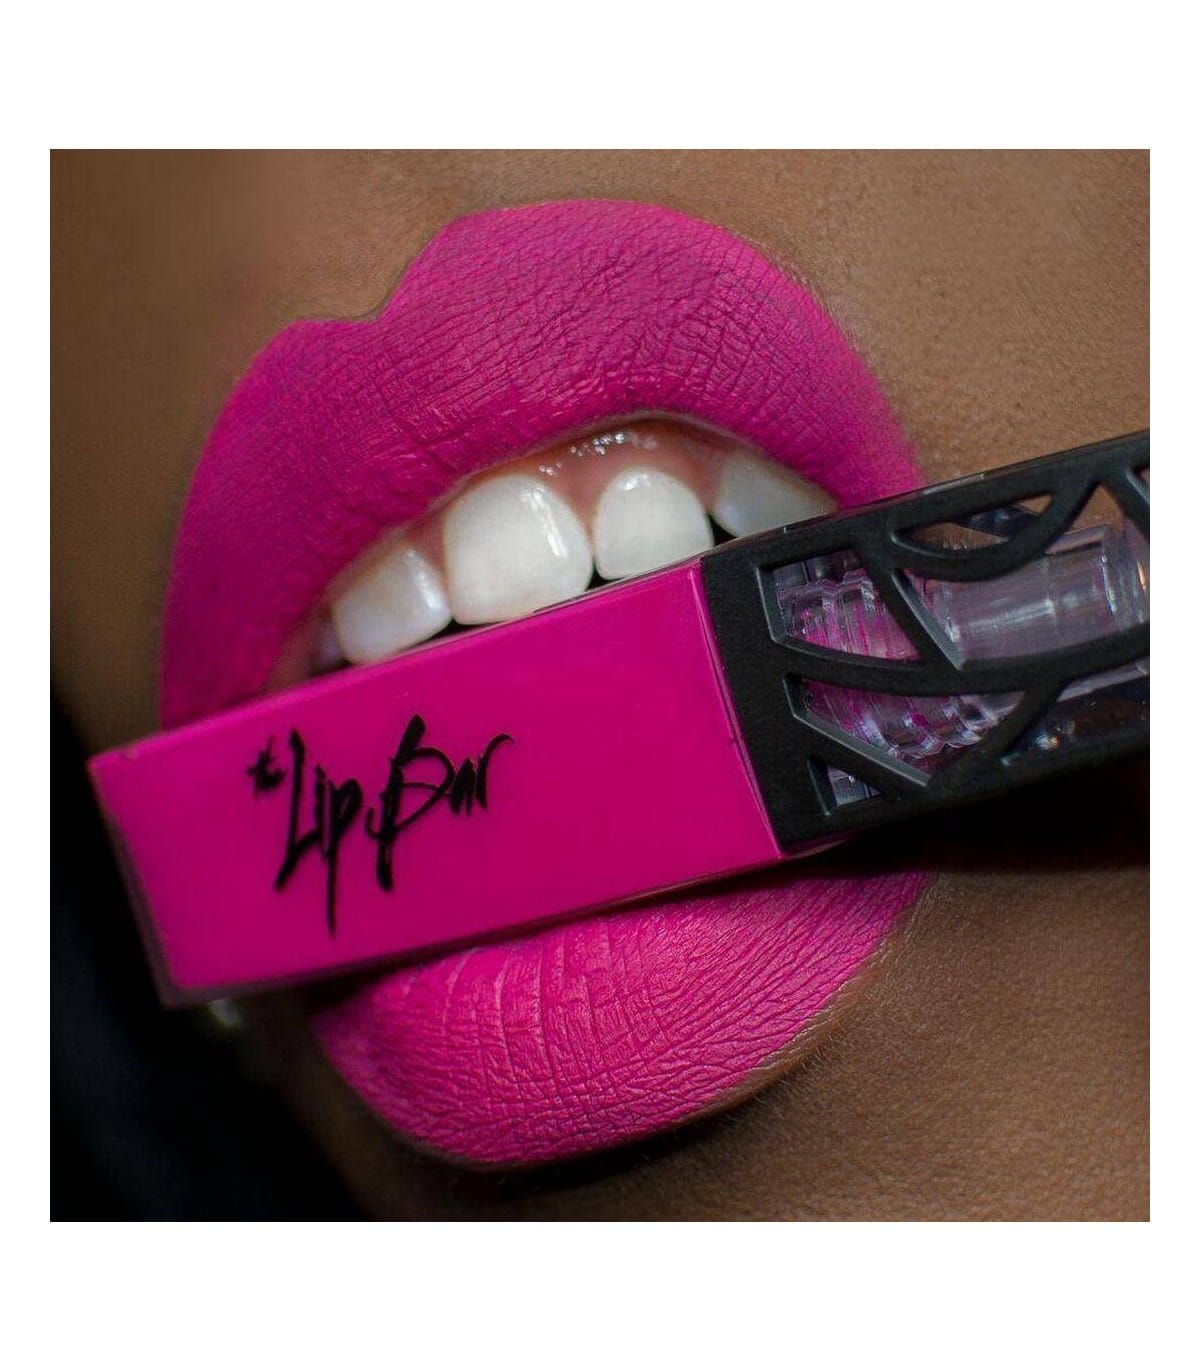 Mouth with bright pink lips biting down on a container of lipstick from the Lip Bar